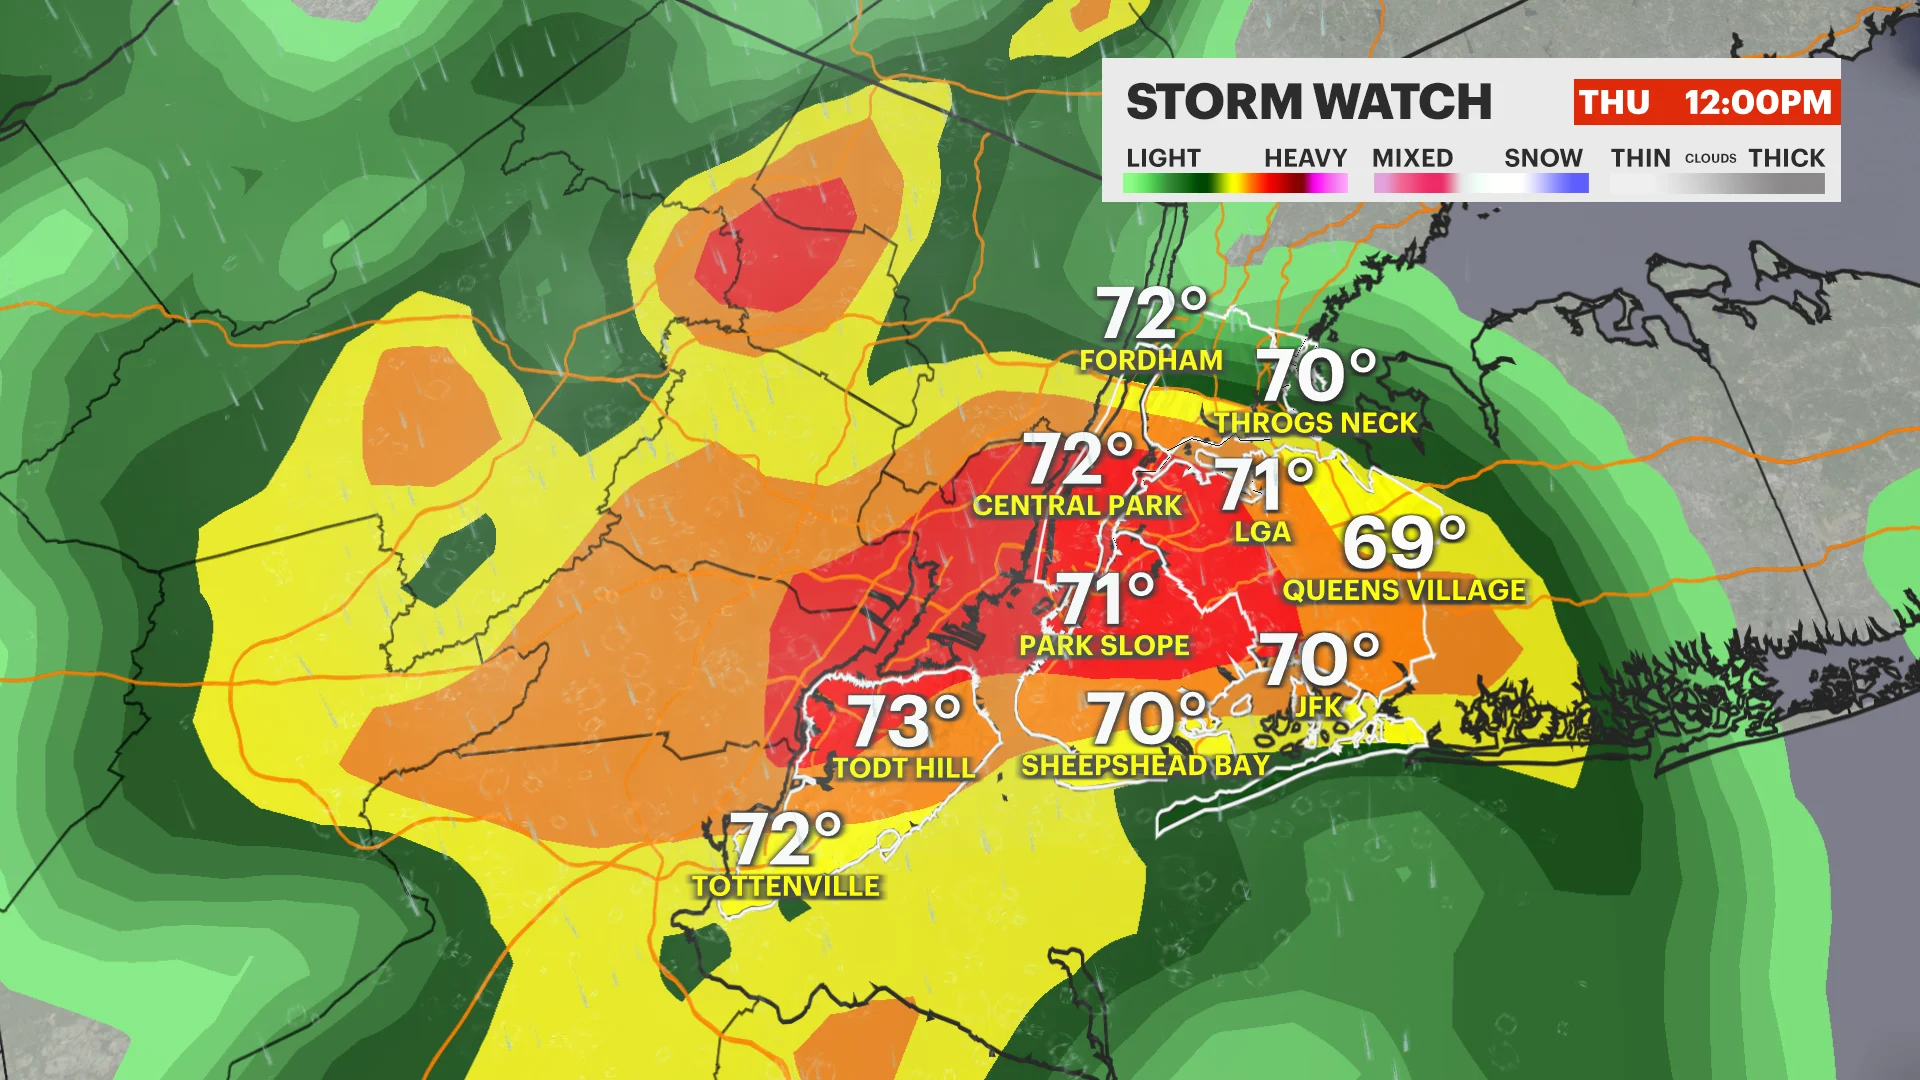 STORM WATCH: Thunderstorms likely for Thursday followed by more summer-like heat